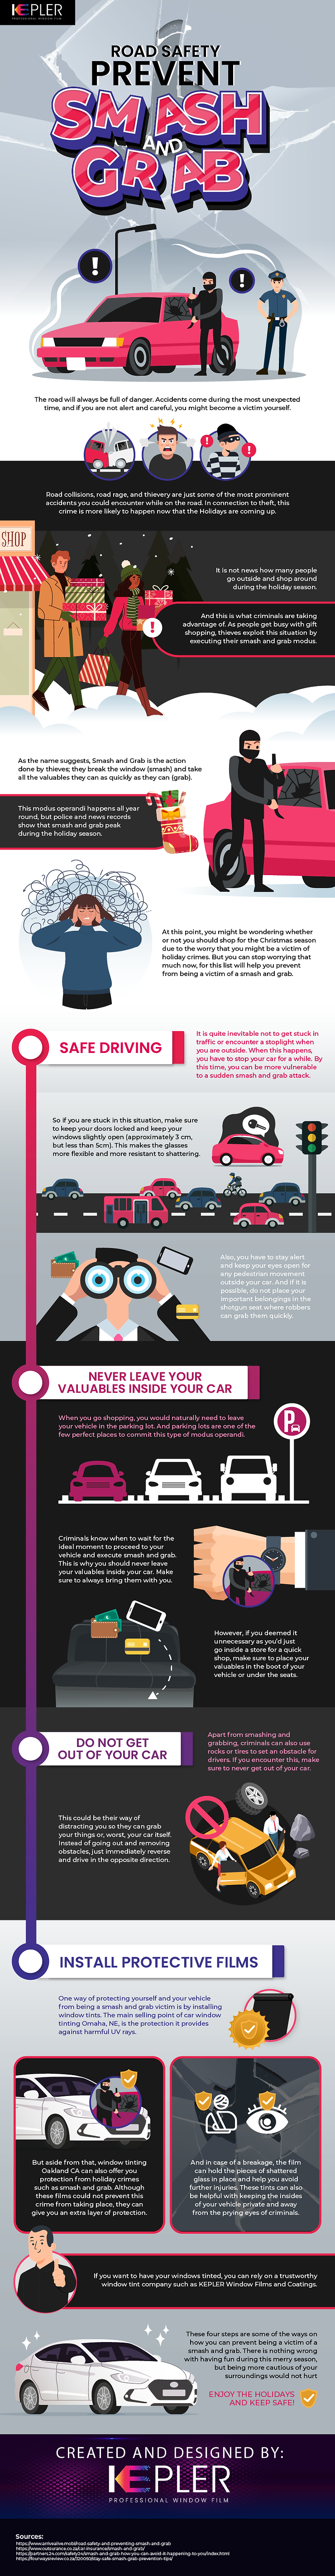 Road Safety: Prevent Smash And Grab - Infographic